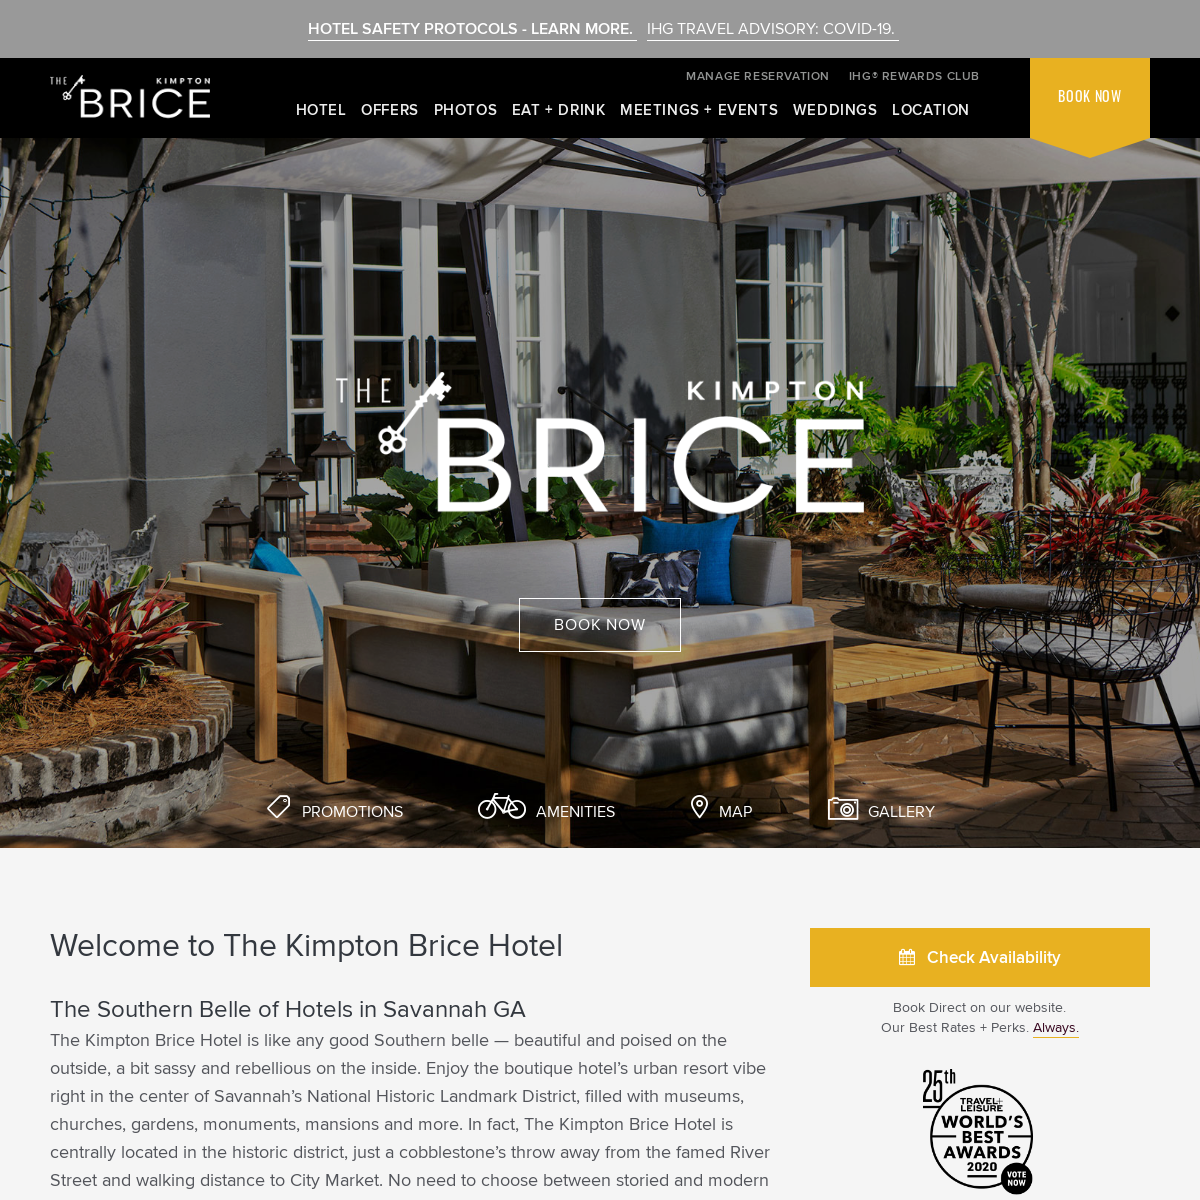 A complete backup of bricehotel.com